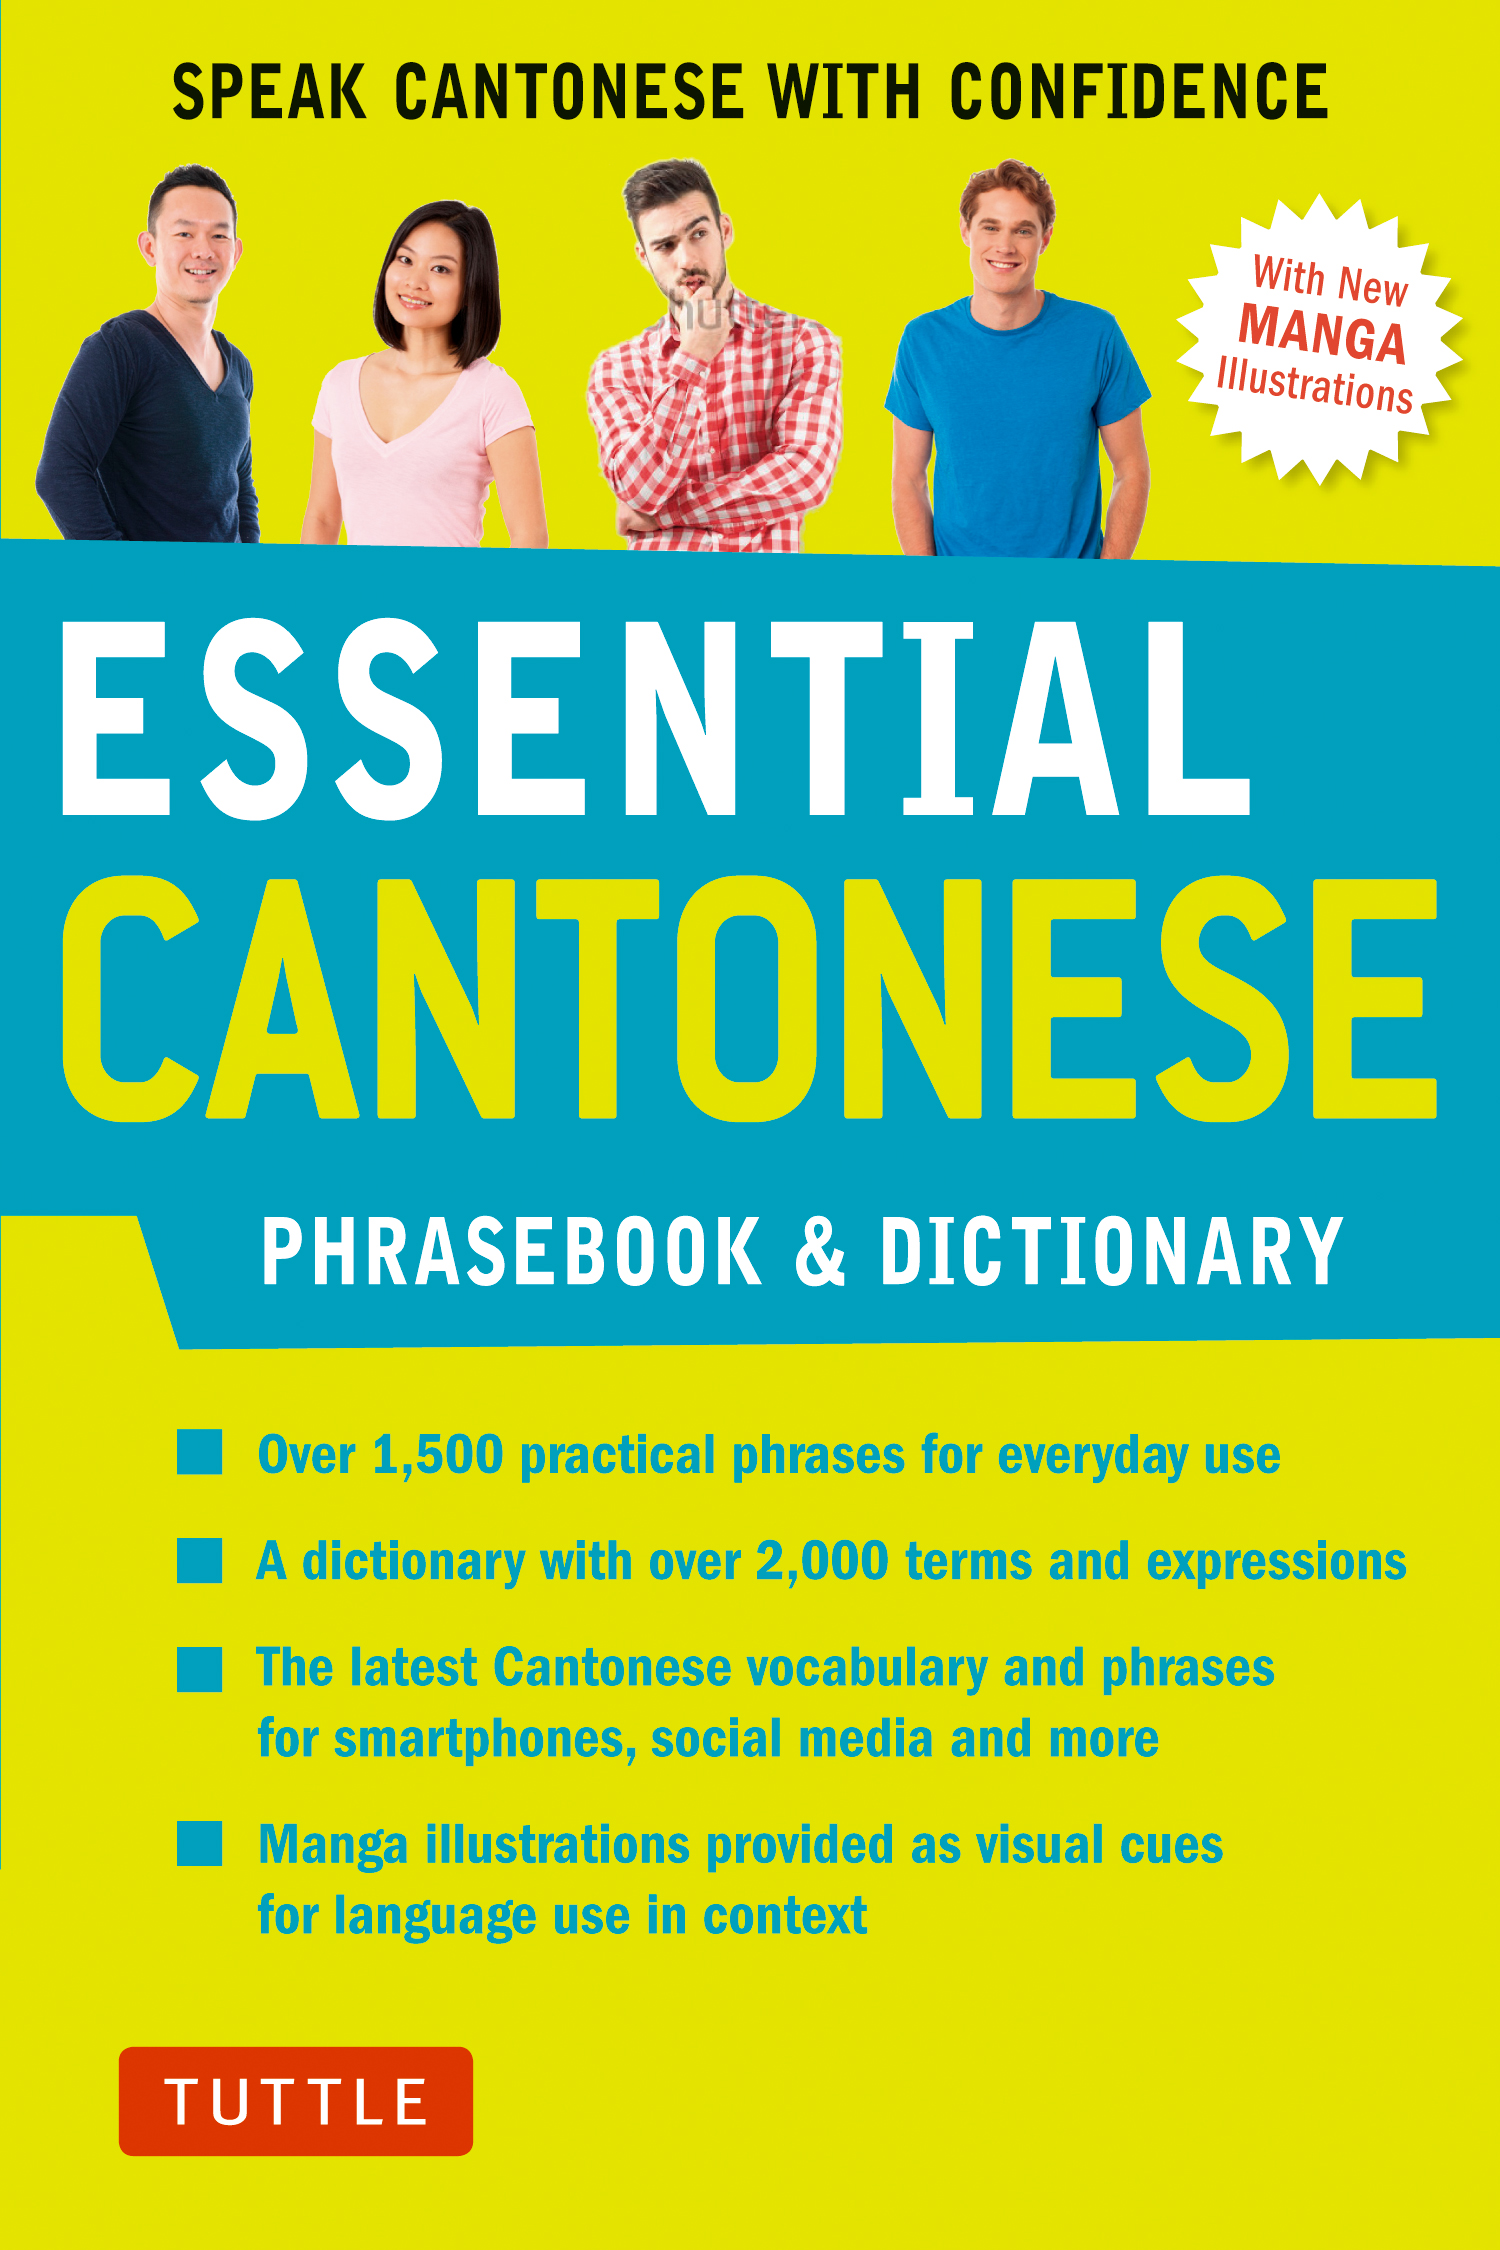 Essential Cantonese Phrasebook &amp; Dictionary : Speak Cantonese with Confidence (Cantonese Chinese Phrasebook &amp; Dictionary with Manga illustrations) | Tang, Martha